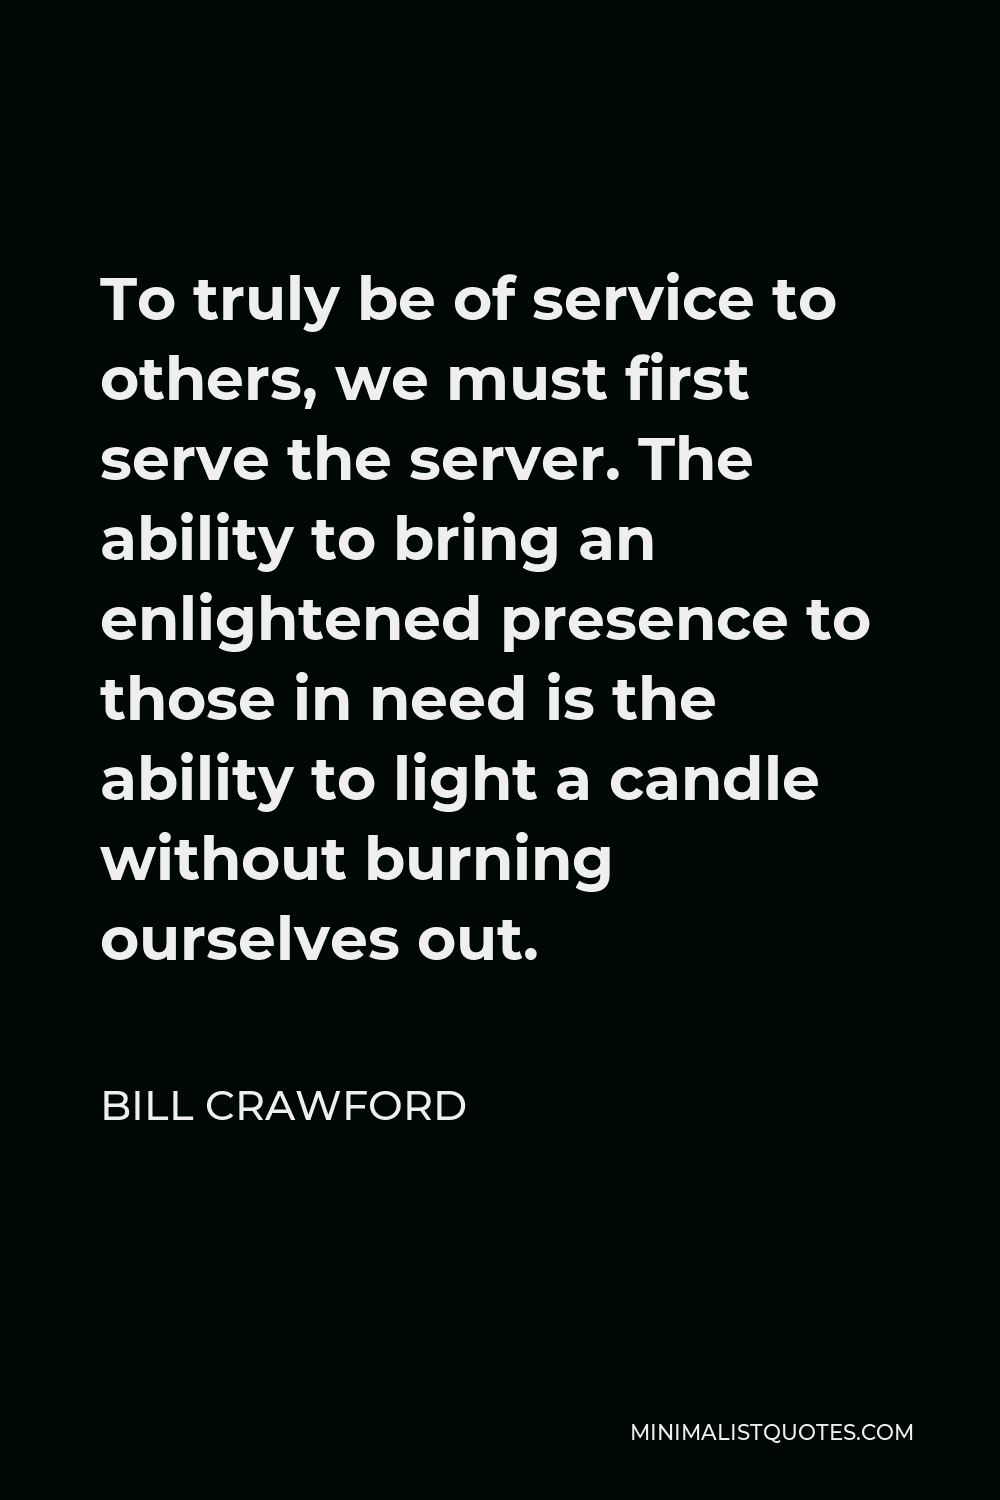 Bill Crawford Quote - To truly be of service to others, we must first serve the server. The ability to bring an enlightened presence to those in need is the ability to light a candle without burning ourselves out.